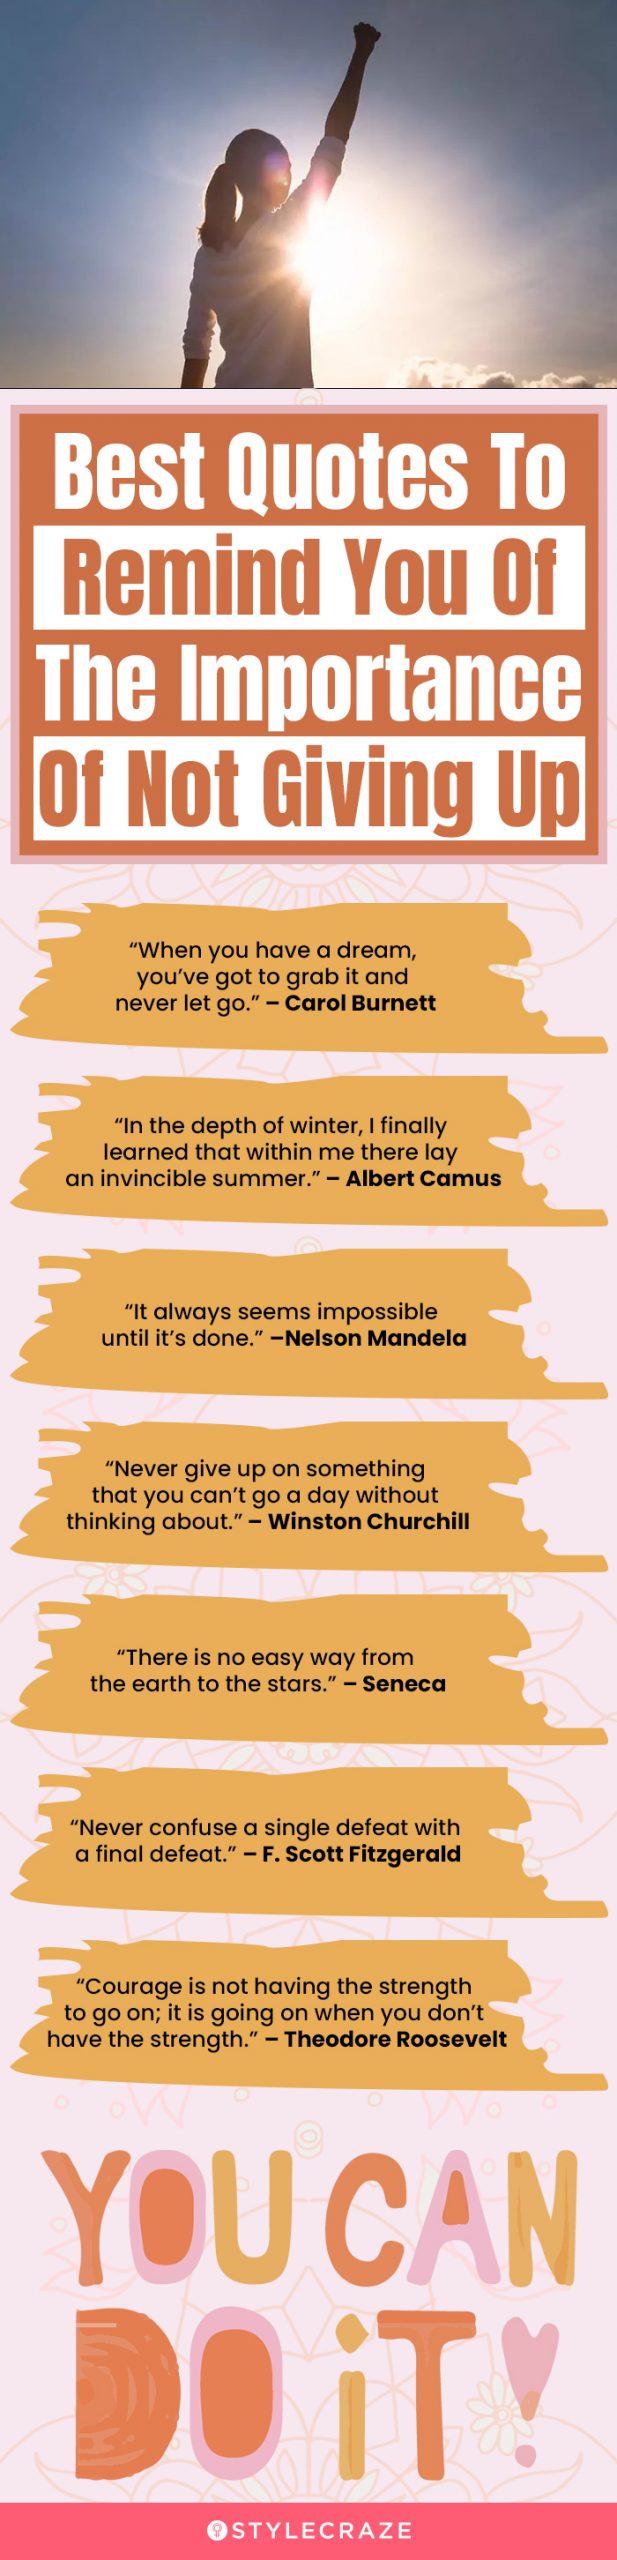 best quotes to remind you of the importance of not giving up (infographic)